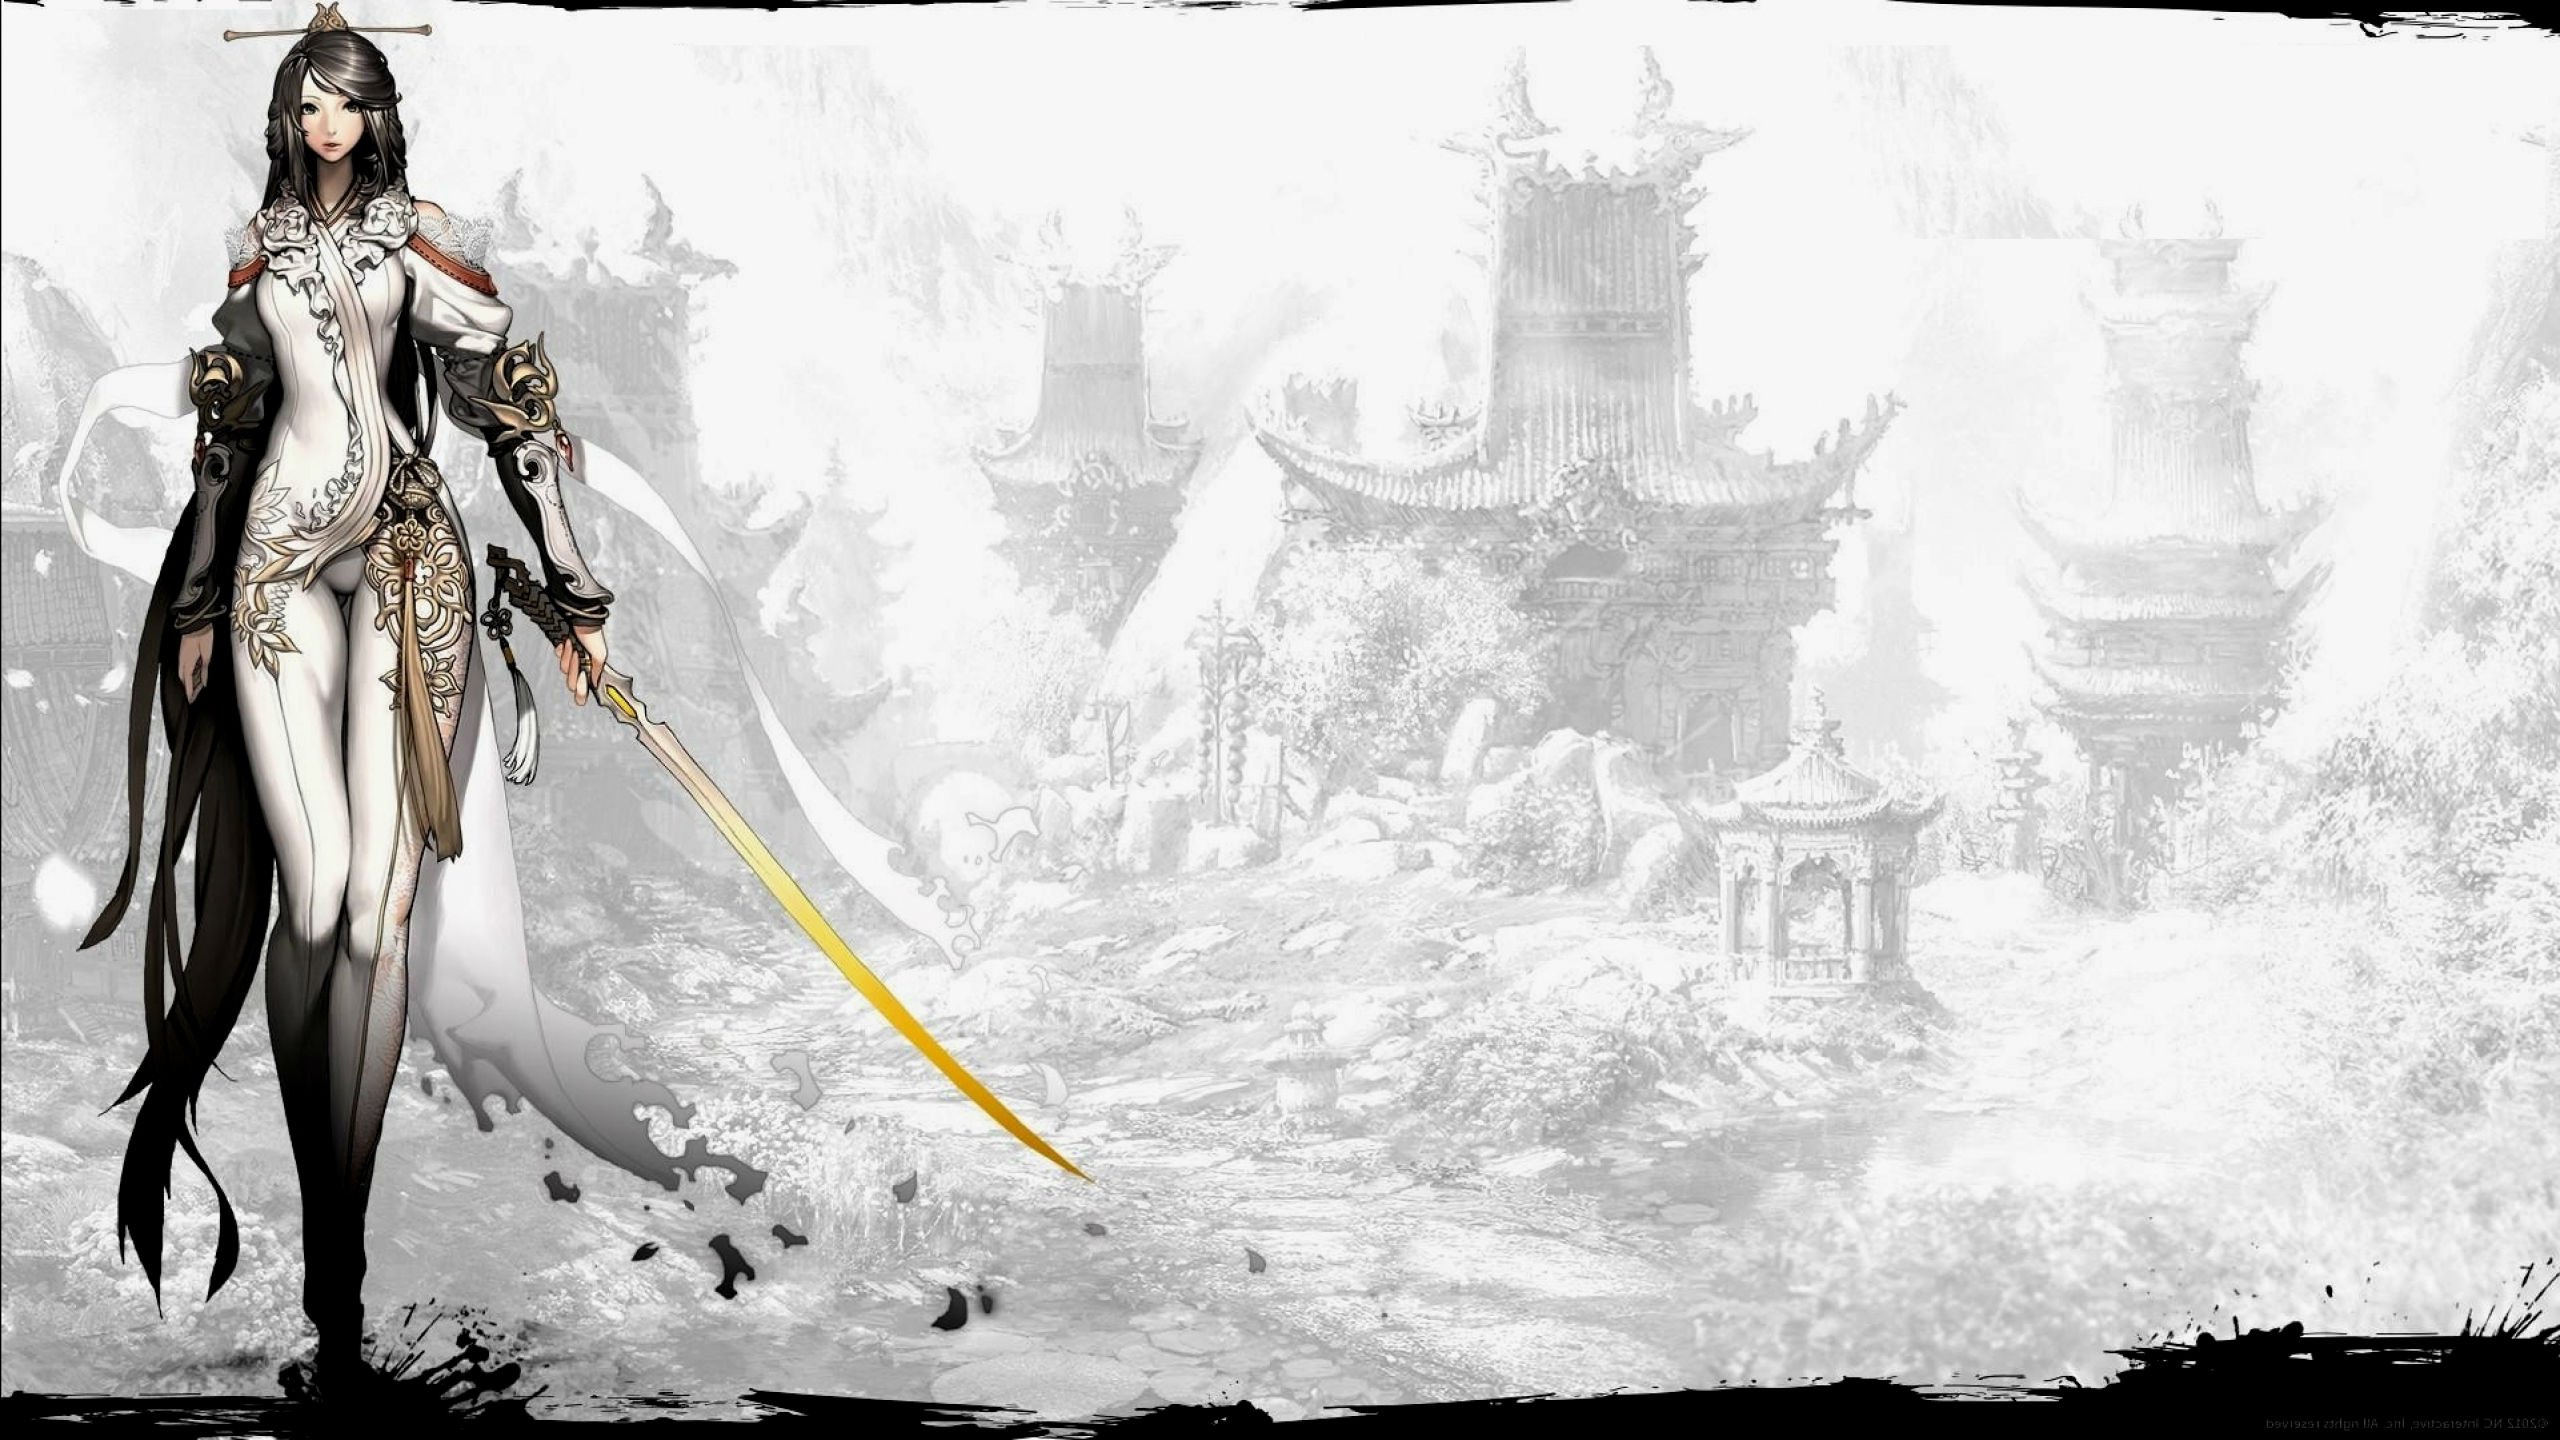 blade, And, Soul, Asian, Martial, Arts, Action, Fighting, 1blades, Online, Mmo, Rpg, Beulleideu, Aen, Anime, Fantasy, Perfect Wallpaper